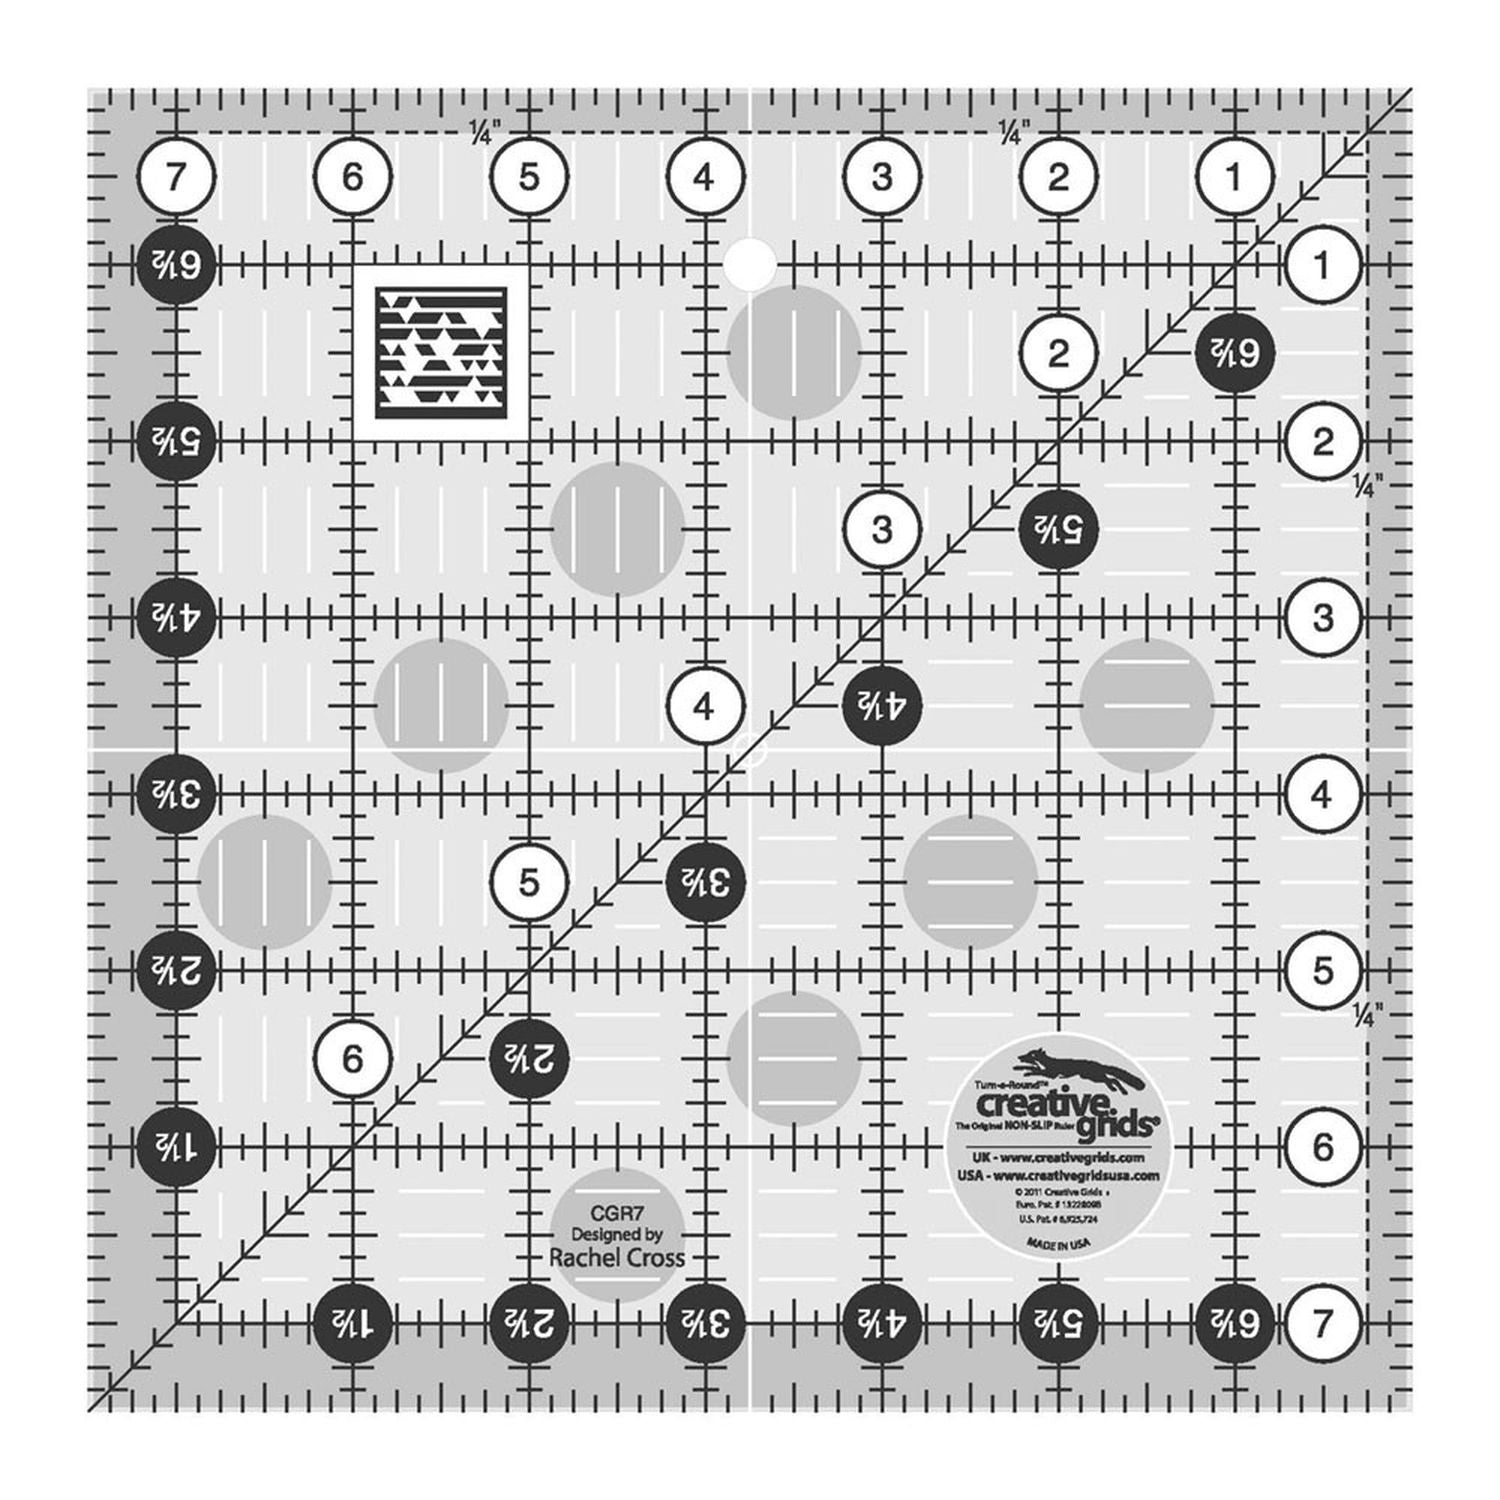 Creative Grids 7-1/2-Inch Square Quilt Ruler